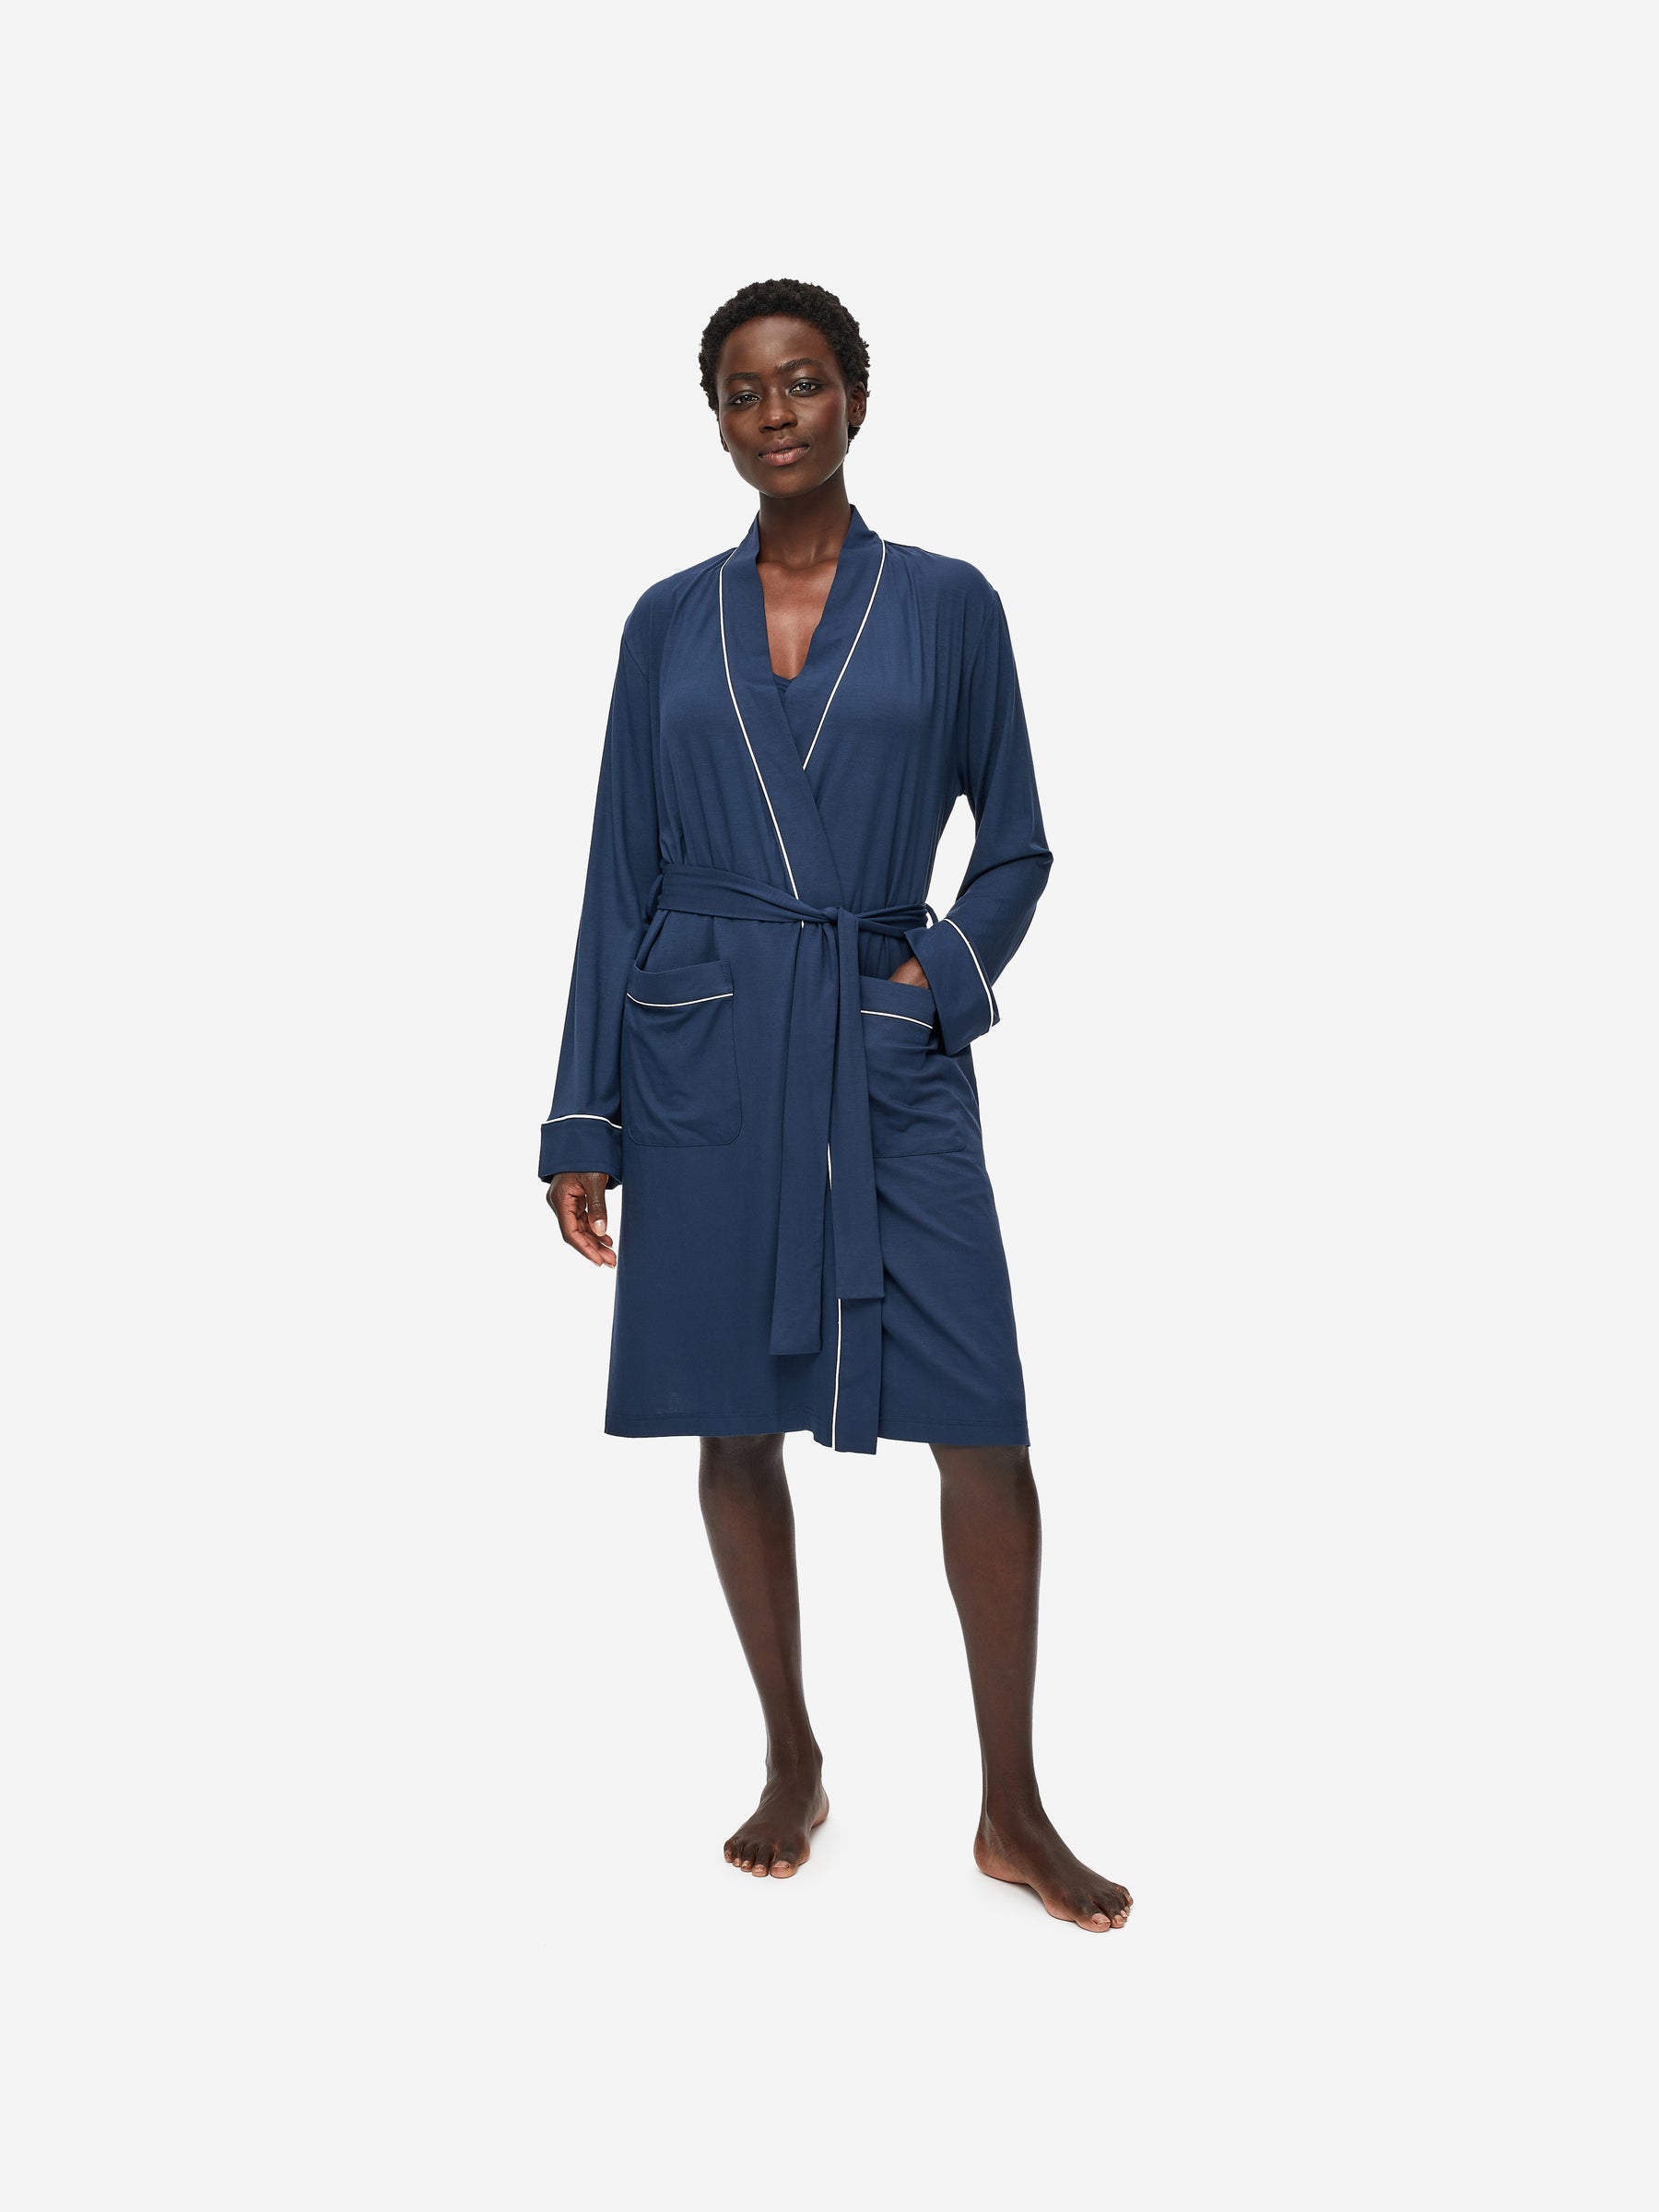 Personalised SHAWL Dressing Gown  Dark Blue for Her  WithCongratulations